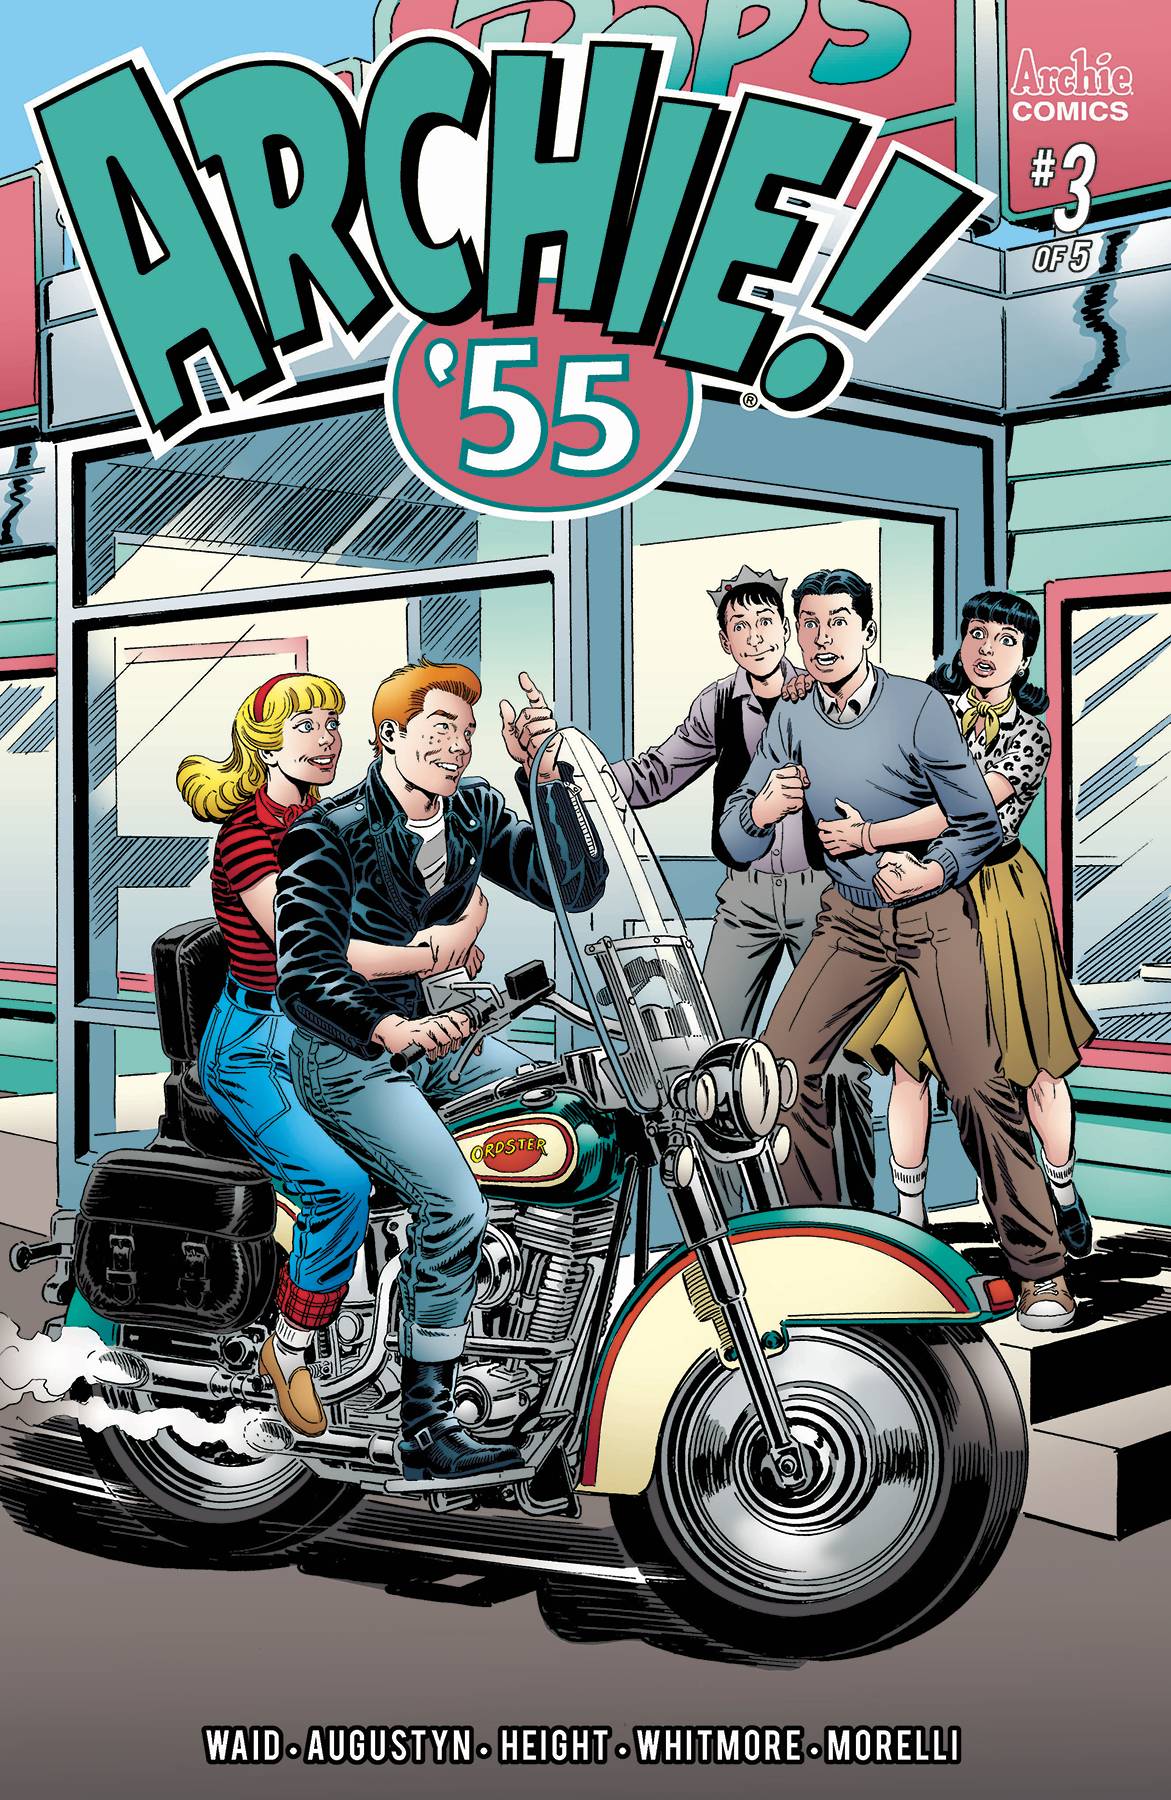 Archie 1955 #3 Cover B Ordway (Of 5)